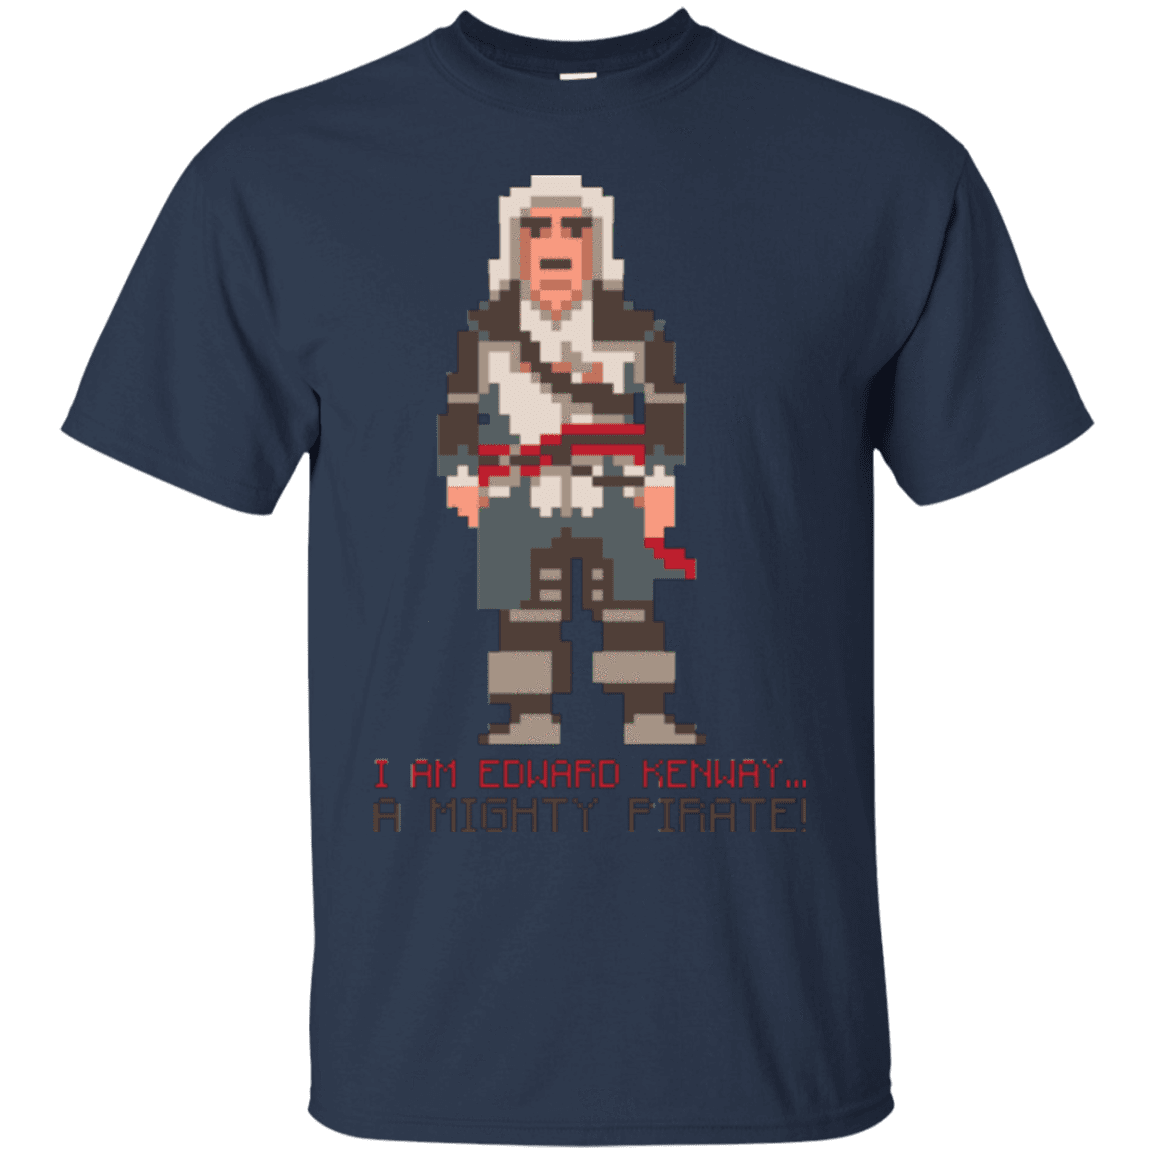 T-Shirts Navy / Small A Mighty Pirate T-Shirt